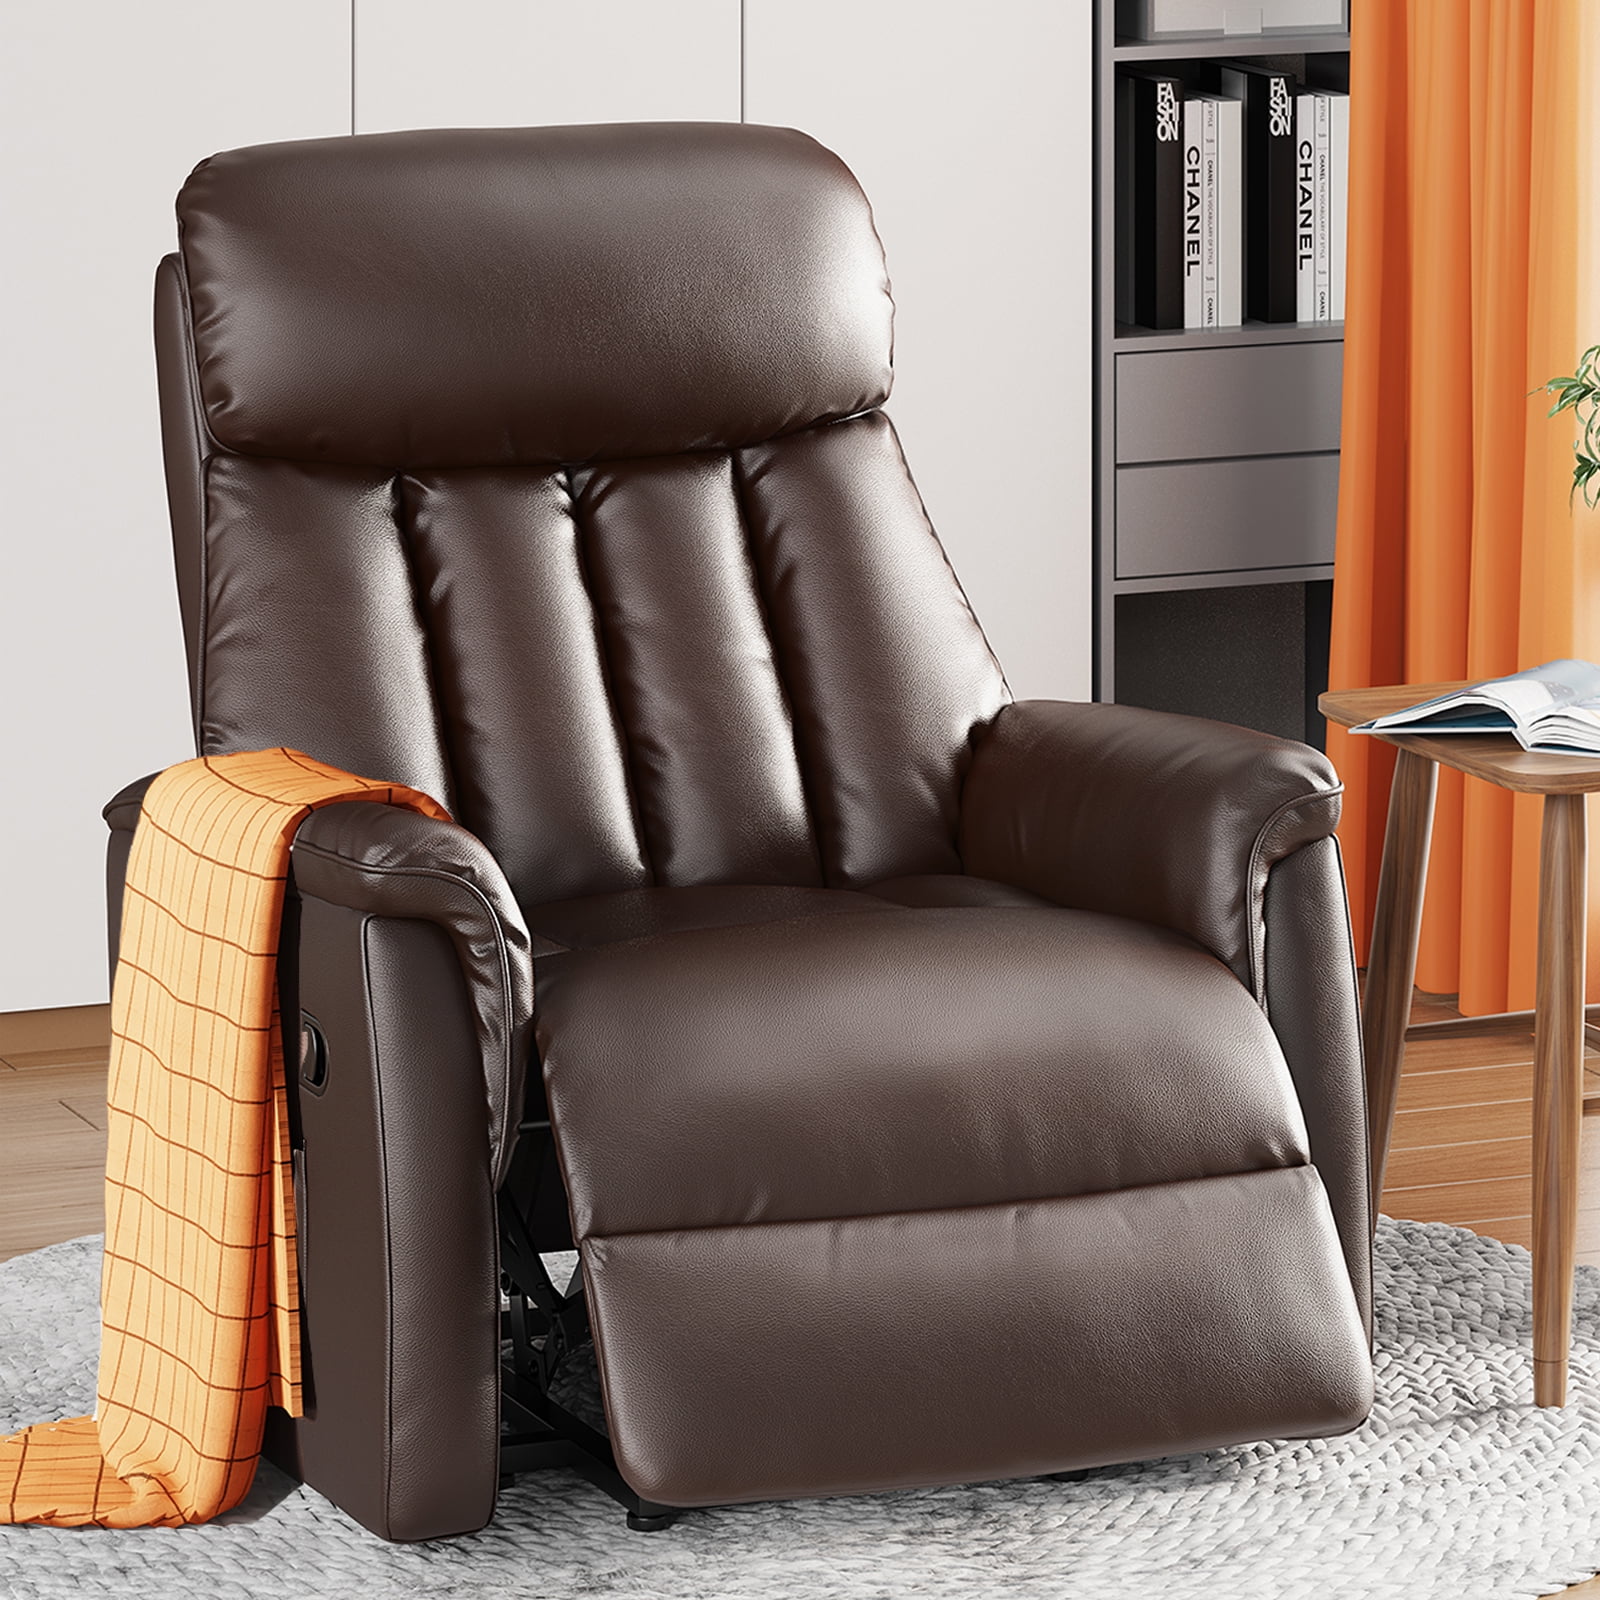 Luxury 12 in 1 Wing Back Leather Recliner Chair Massage Heated Seat Armchair UK 